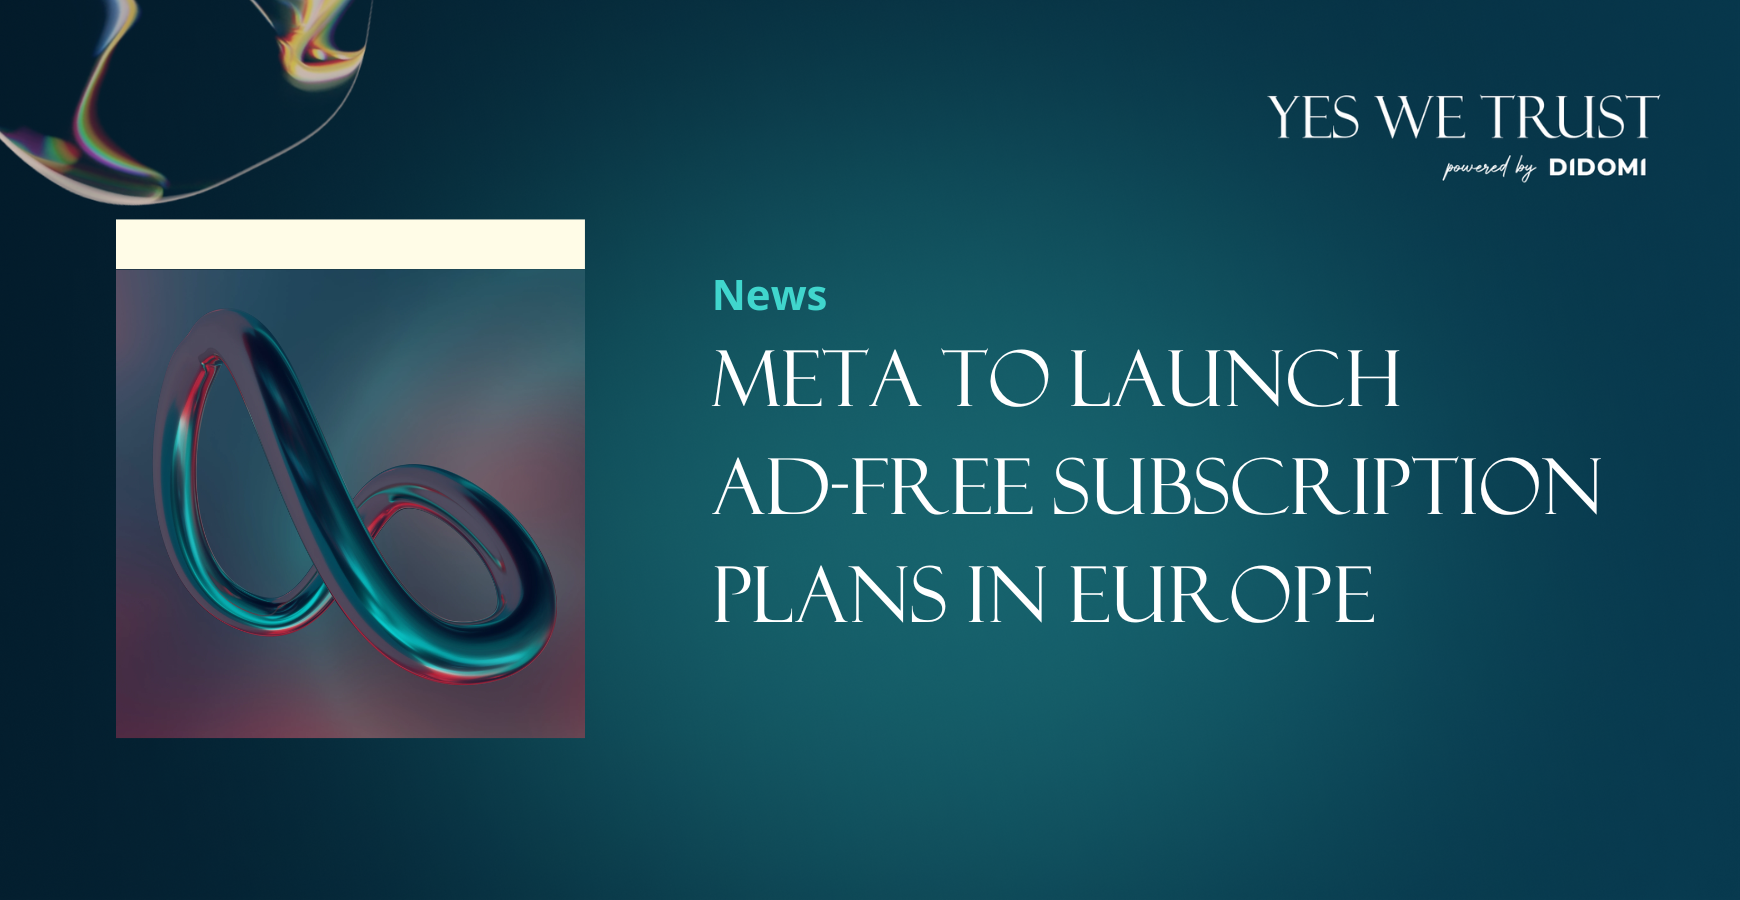 Meta to launch ad-free subscription plans in Europe